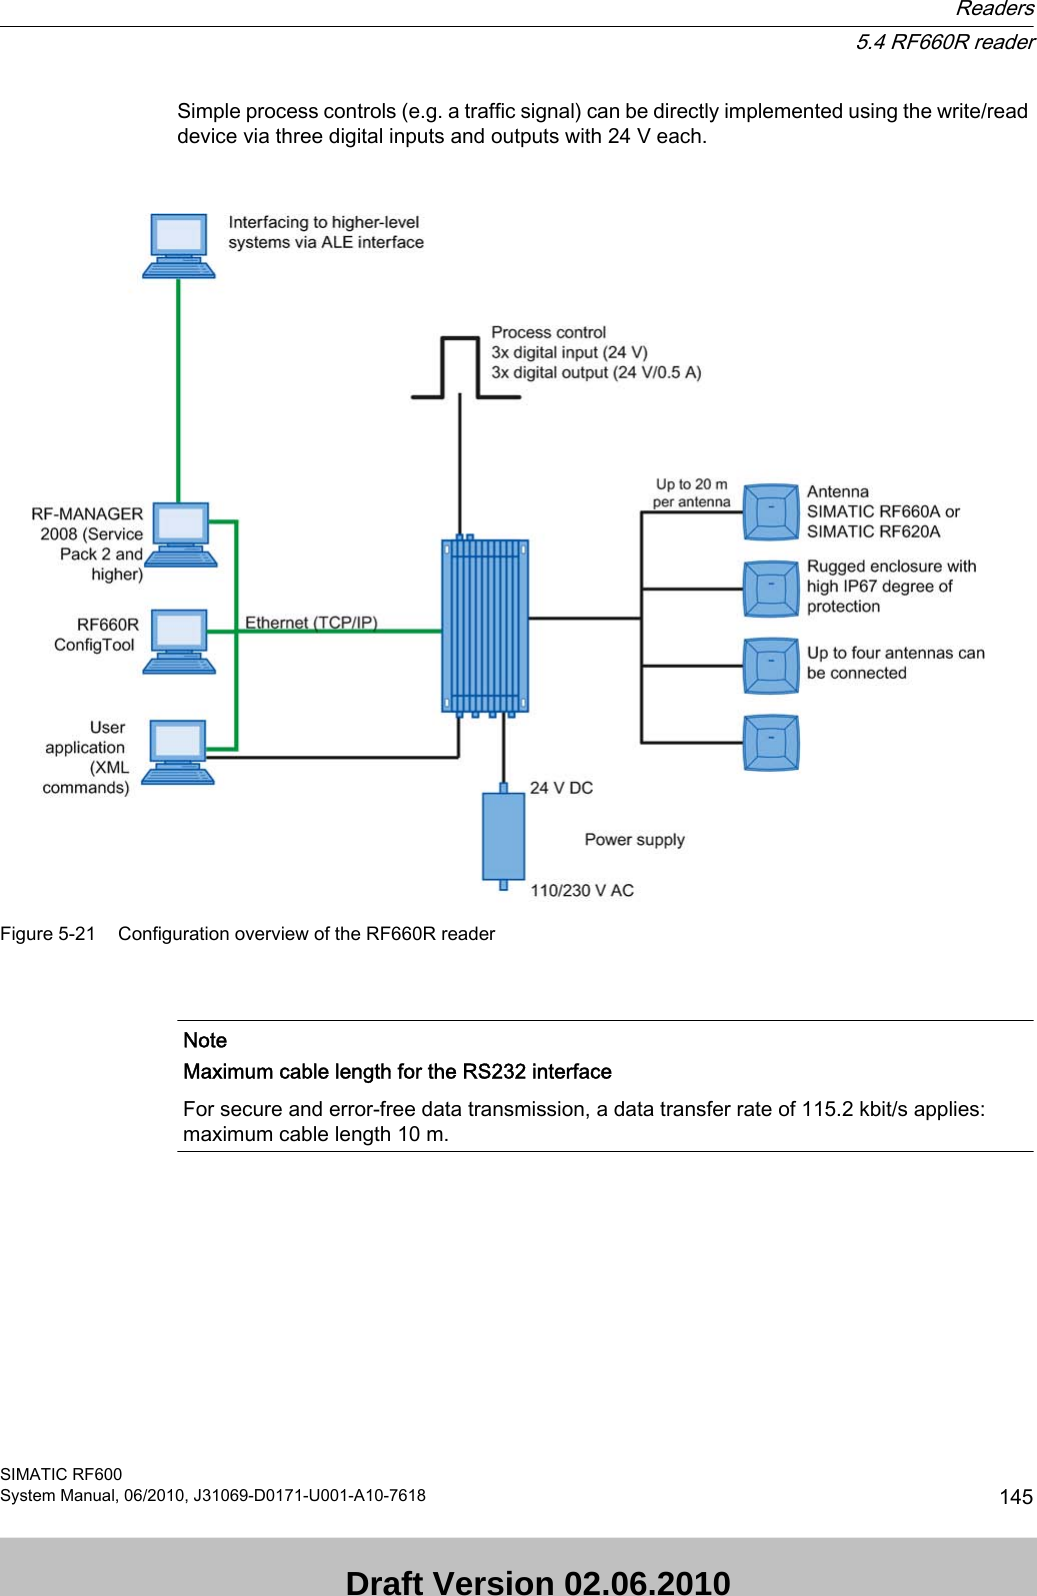 Simple process controls (e.g. a traffic signal) can be directly implemented using the write/read device via three digital inputs and outputs with 24 V each. Figure 5-21 Configuration overview of the RF660R reader    NoteMaximum cable length for the RS232 interfaceFor secure and error-free data transmission, a data transfer rate of 115.2 kbit/s applies: maximum cable length 10 m. Readers5.4 RF660R readerSIMATIC RF600System Manual, 06/2010, J31069-D0171-U001-A10-7618 145 Draft Version 02.06.2010 